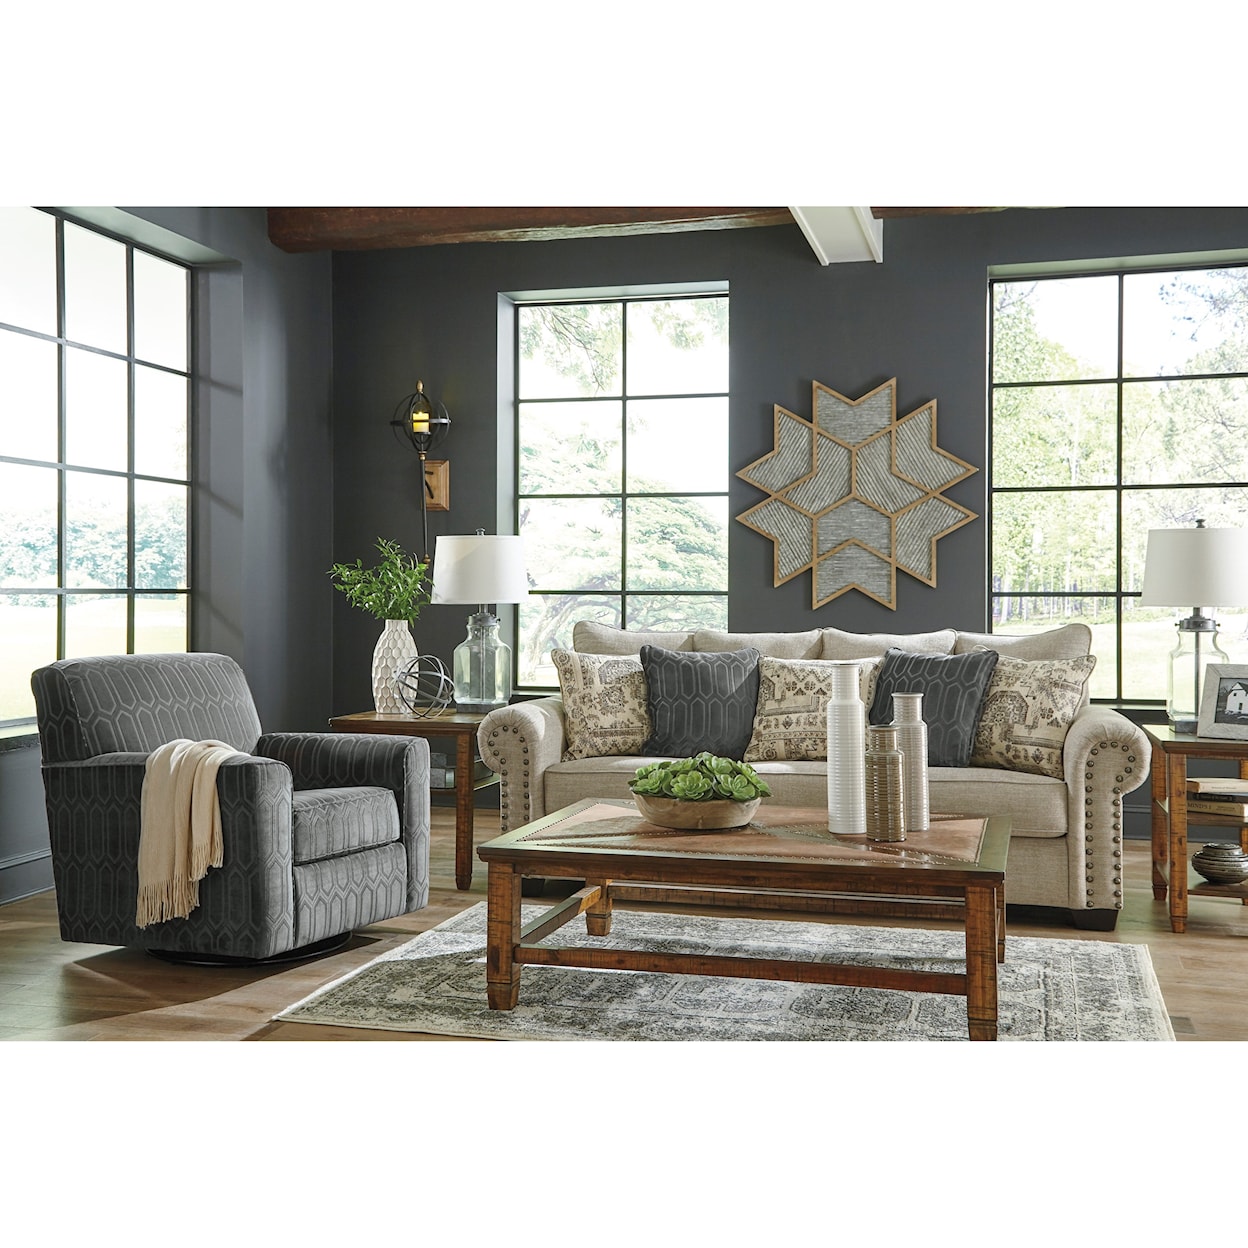 Signature Design by Ashley Furniture Zarina Stationary Living Room Group